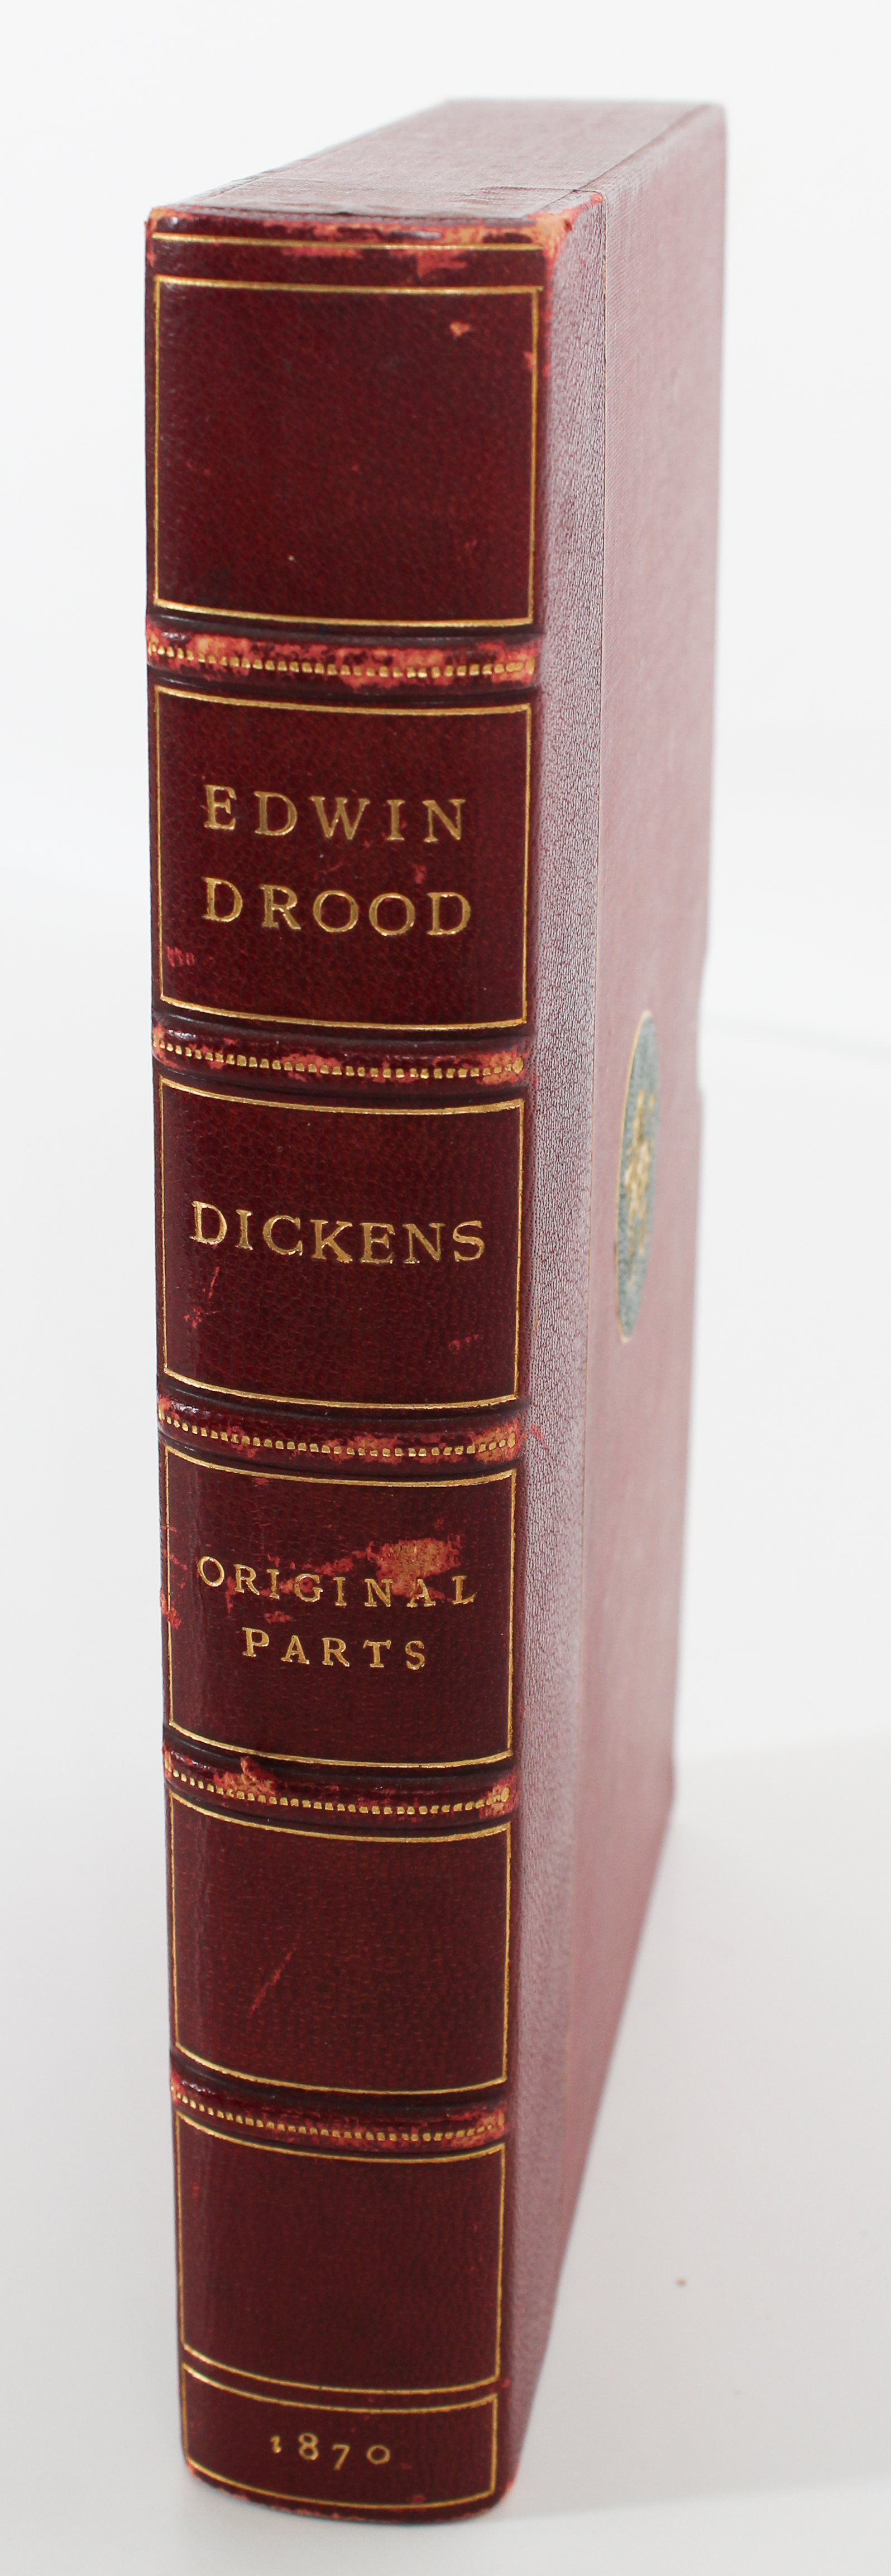 Dickens, The Mystery of Edwin Drood Original Parts - Image 2 of 5